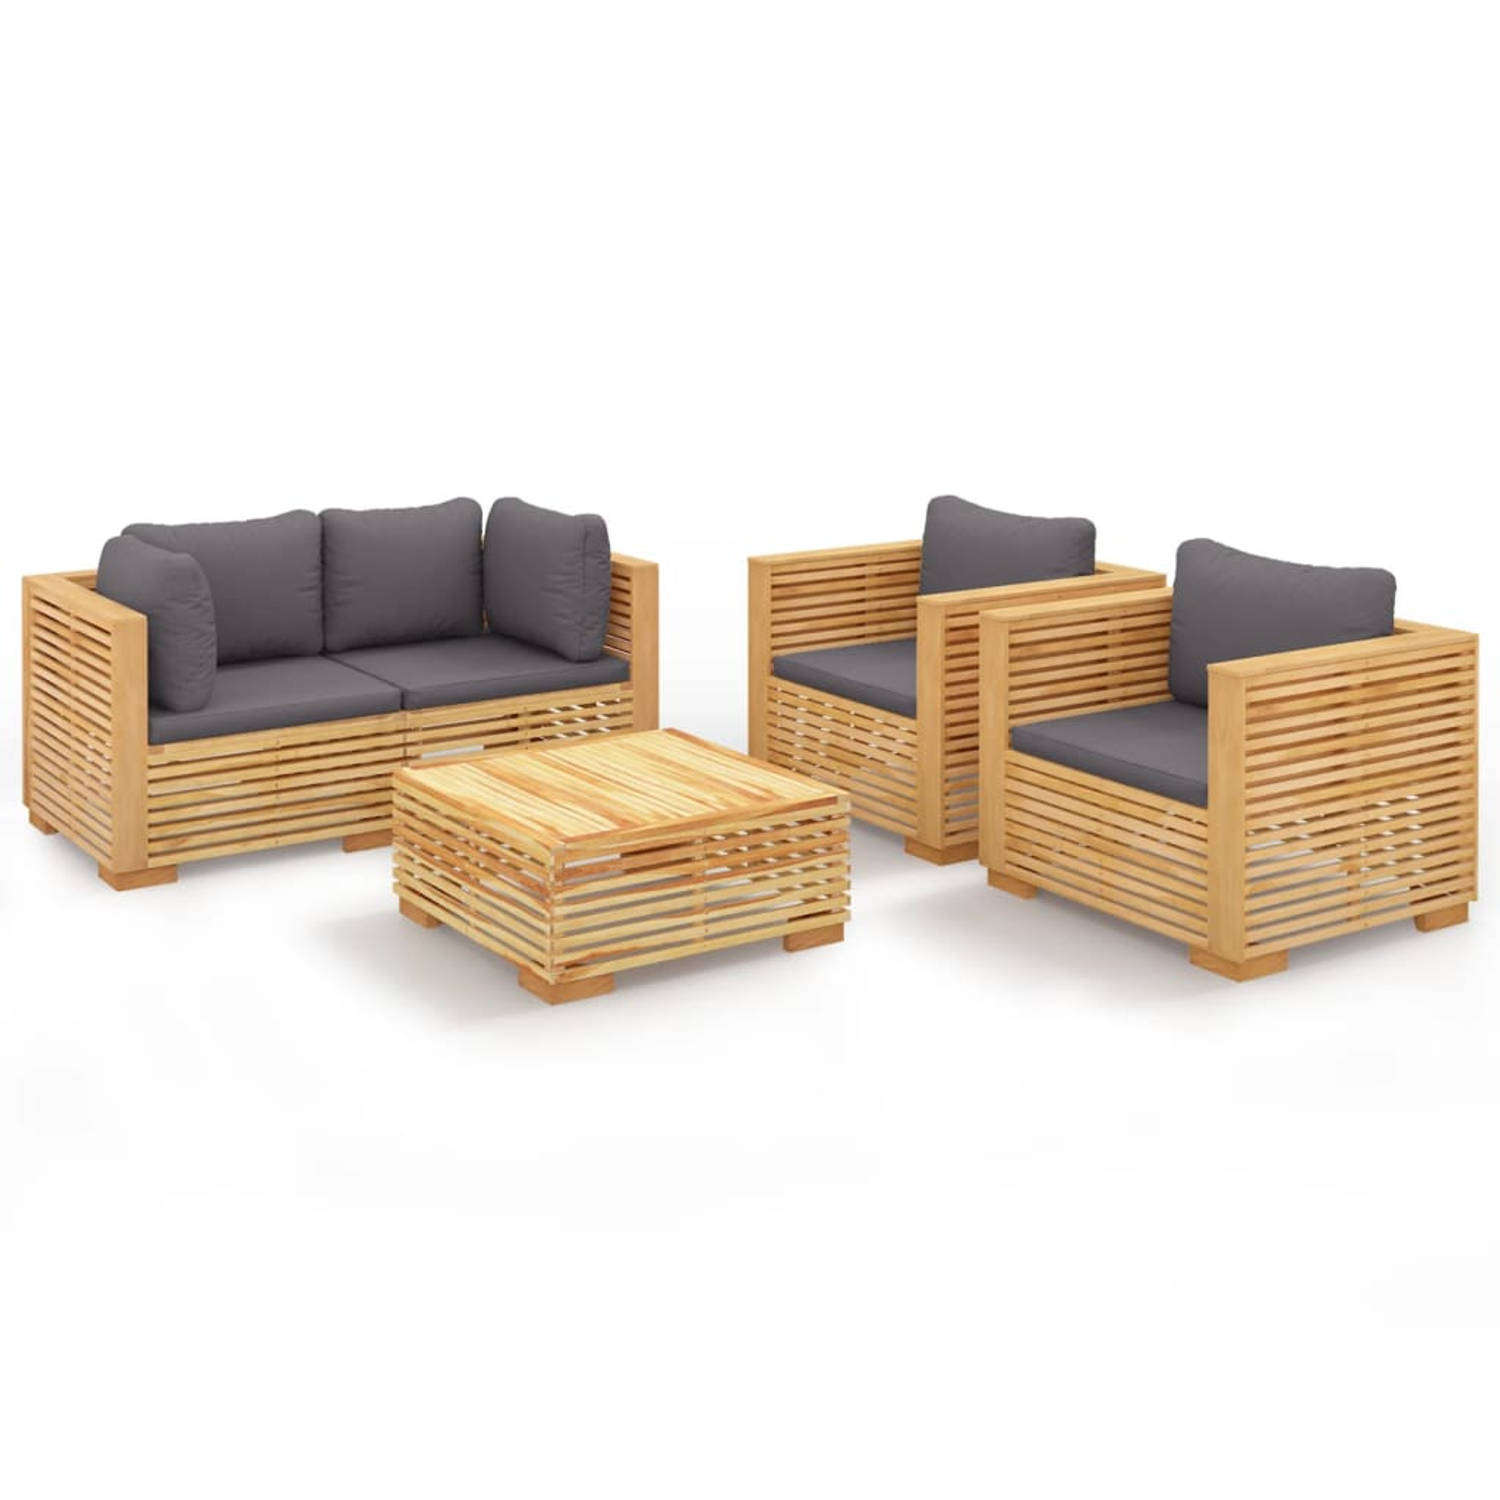 The Living Store Houten Loungeset - Tuin - 69.5 x 69.5 x 60 cm - Teakhout